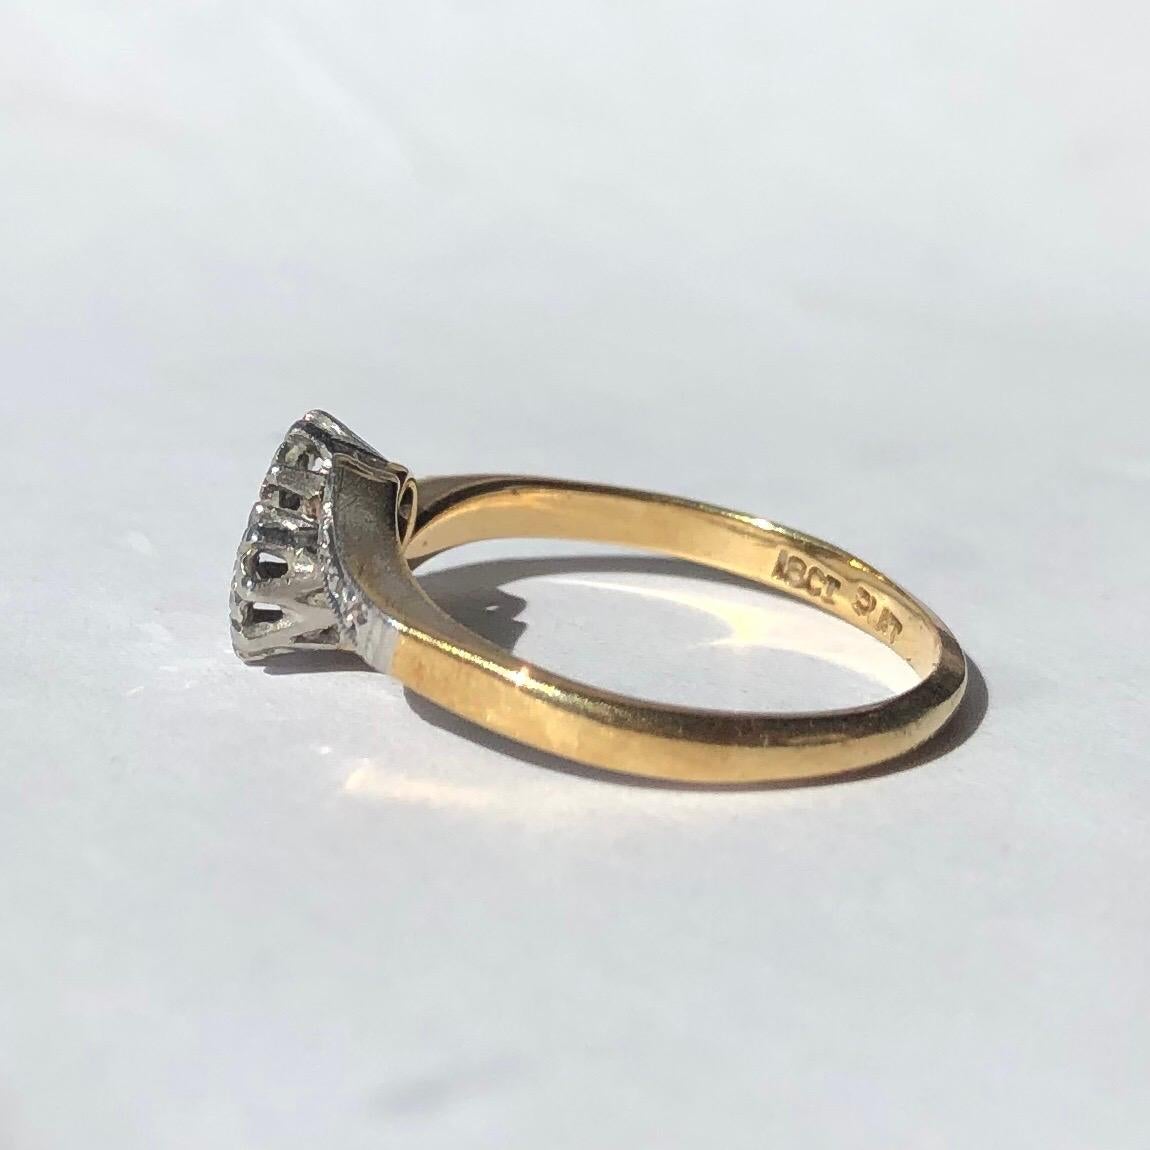 This fancy cross over ring has lots of detail and set within illusion settings are two diamonds. The diamonds total 10pts. The stones are set in platinum and the ring is modelled in 18ct gold. 

Ring Size: N or 6 3/4
Height Off Finger: 4mm
Widest